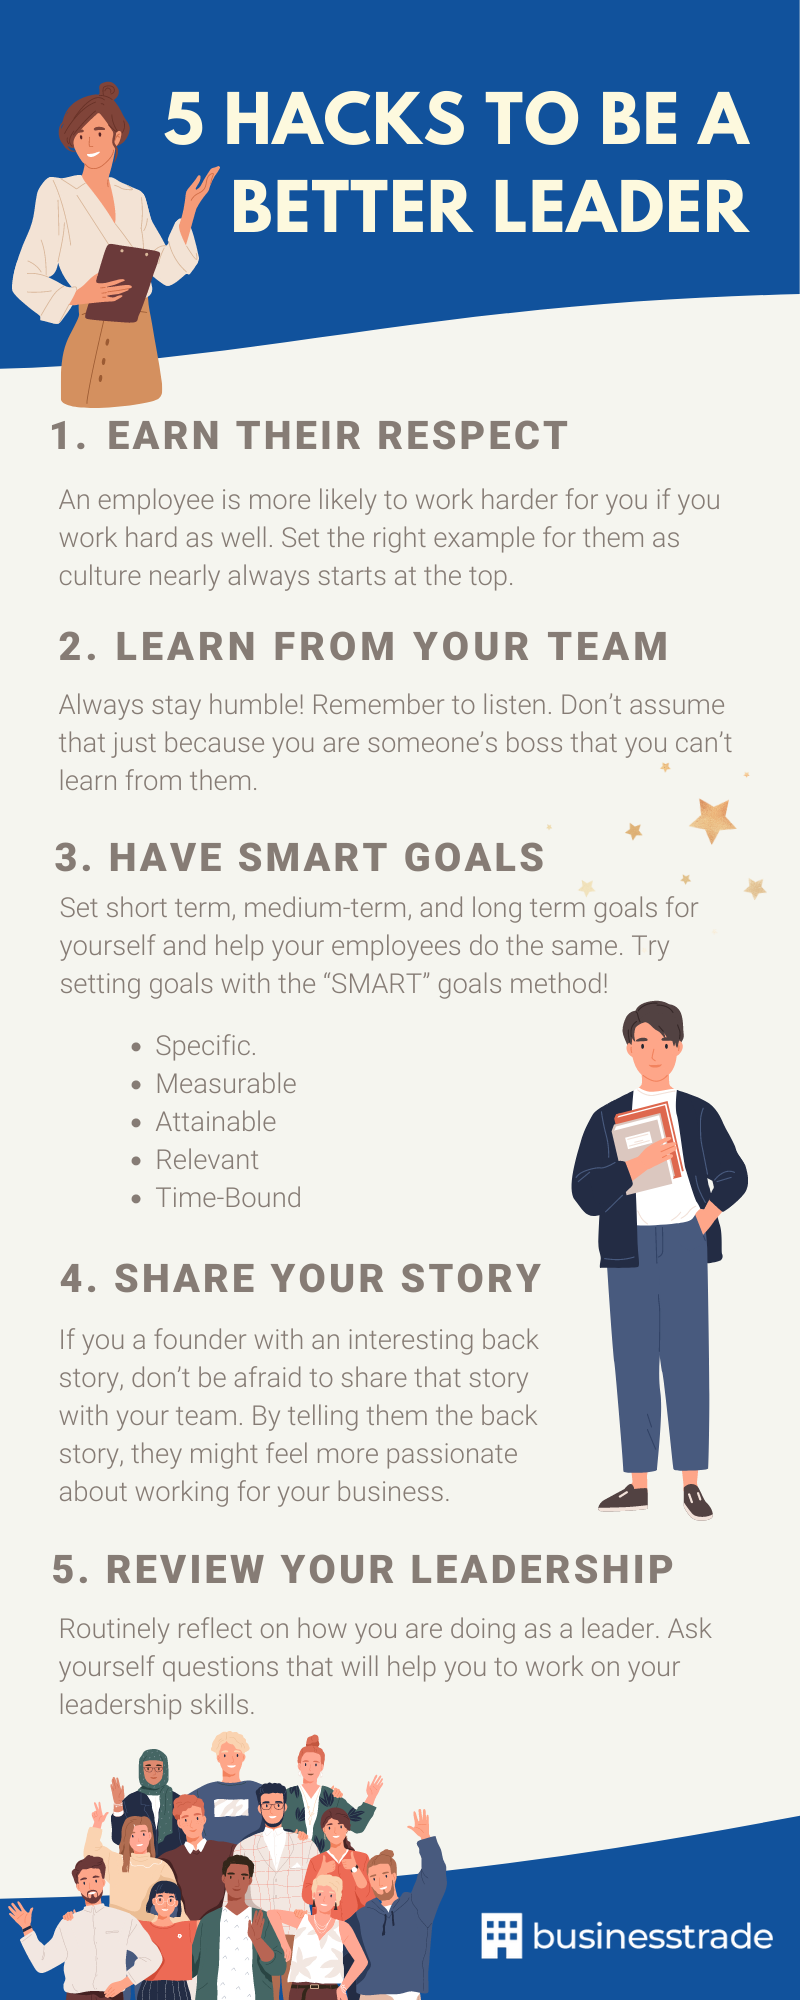 5 hacks to be a better leader